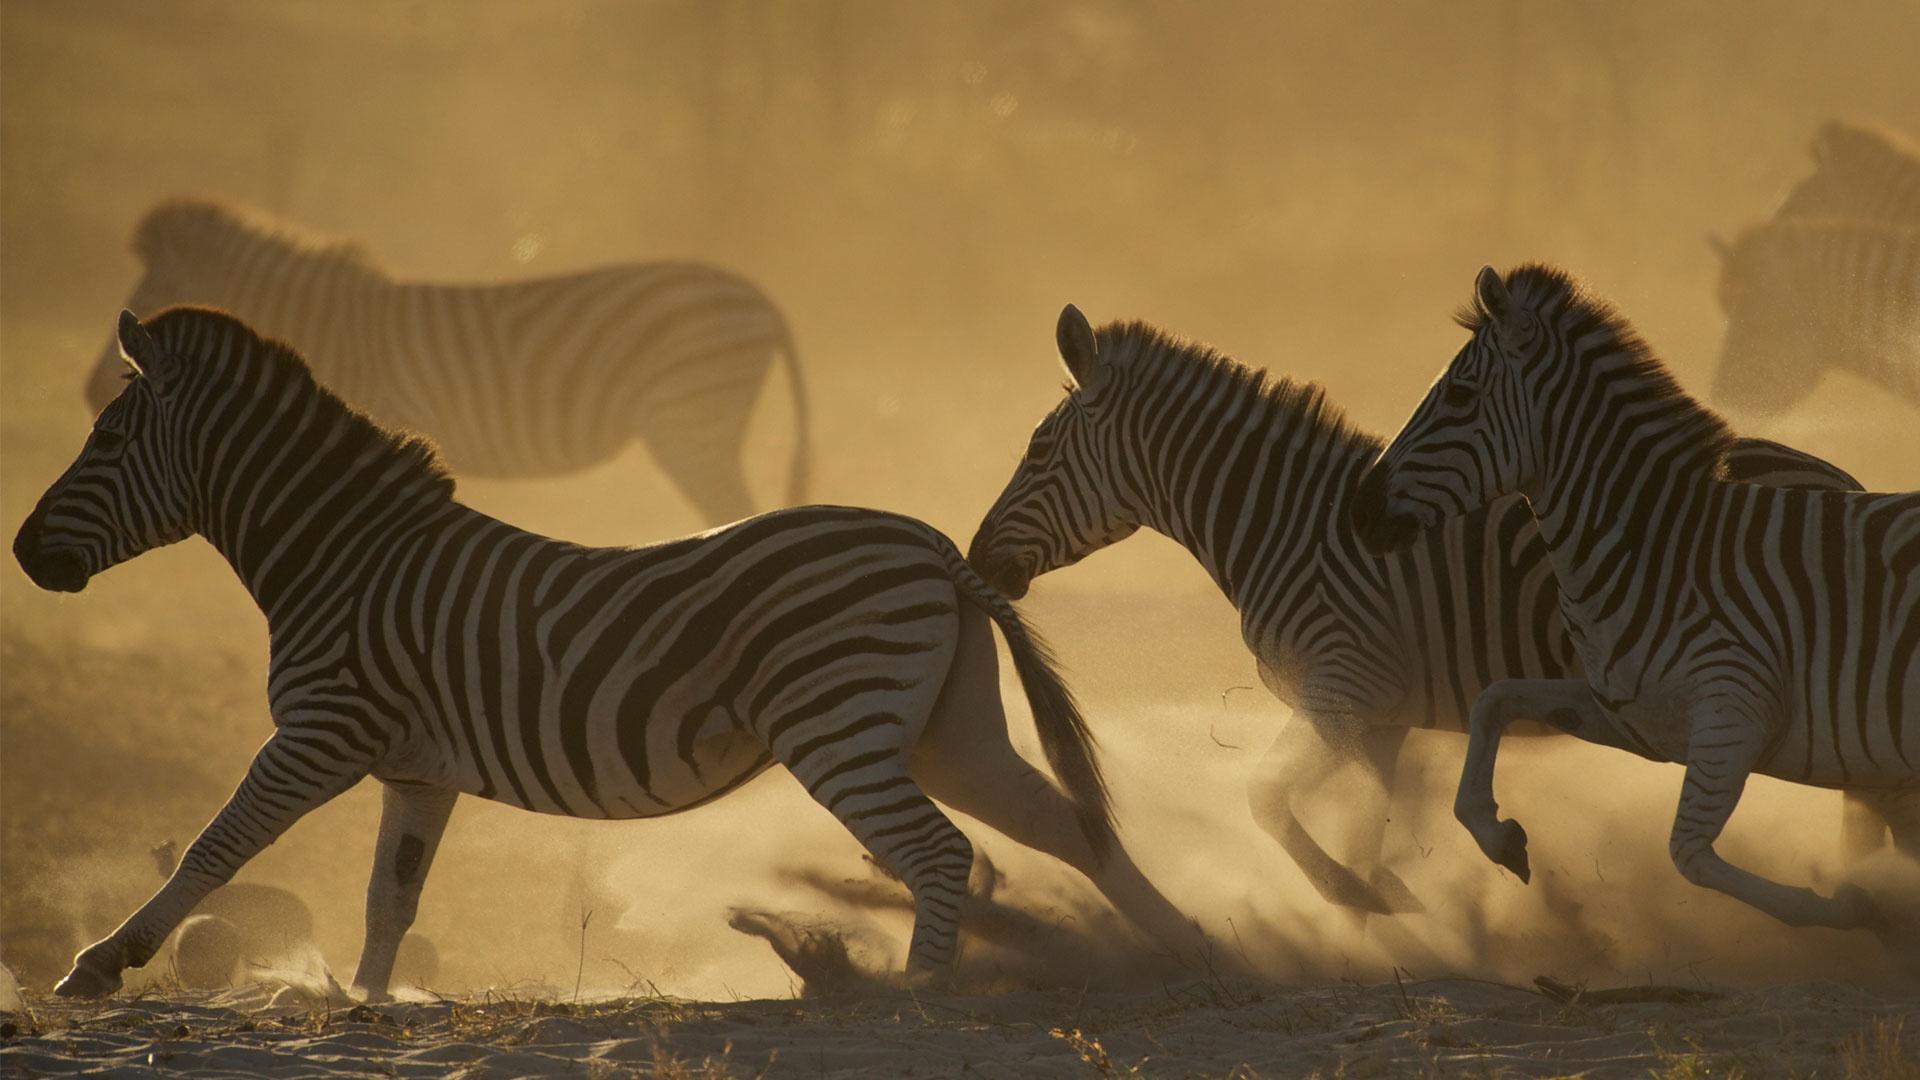 Zooming in on Zebras - NWF